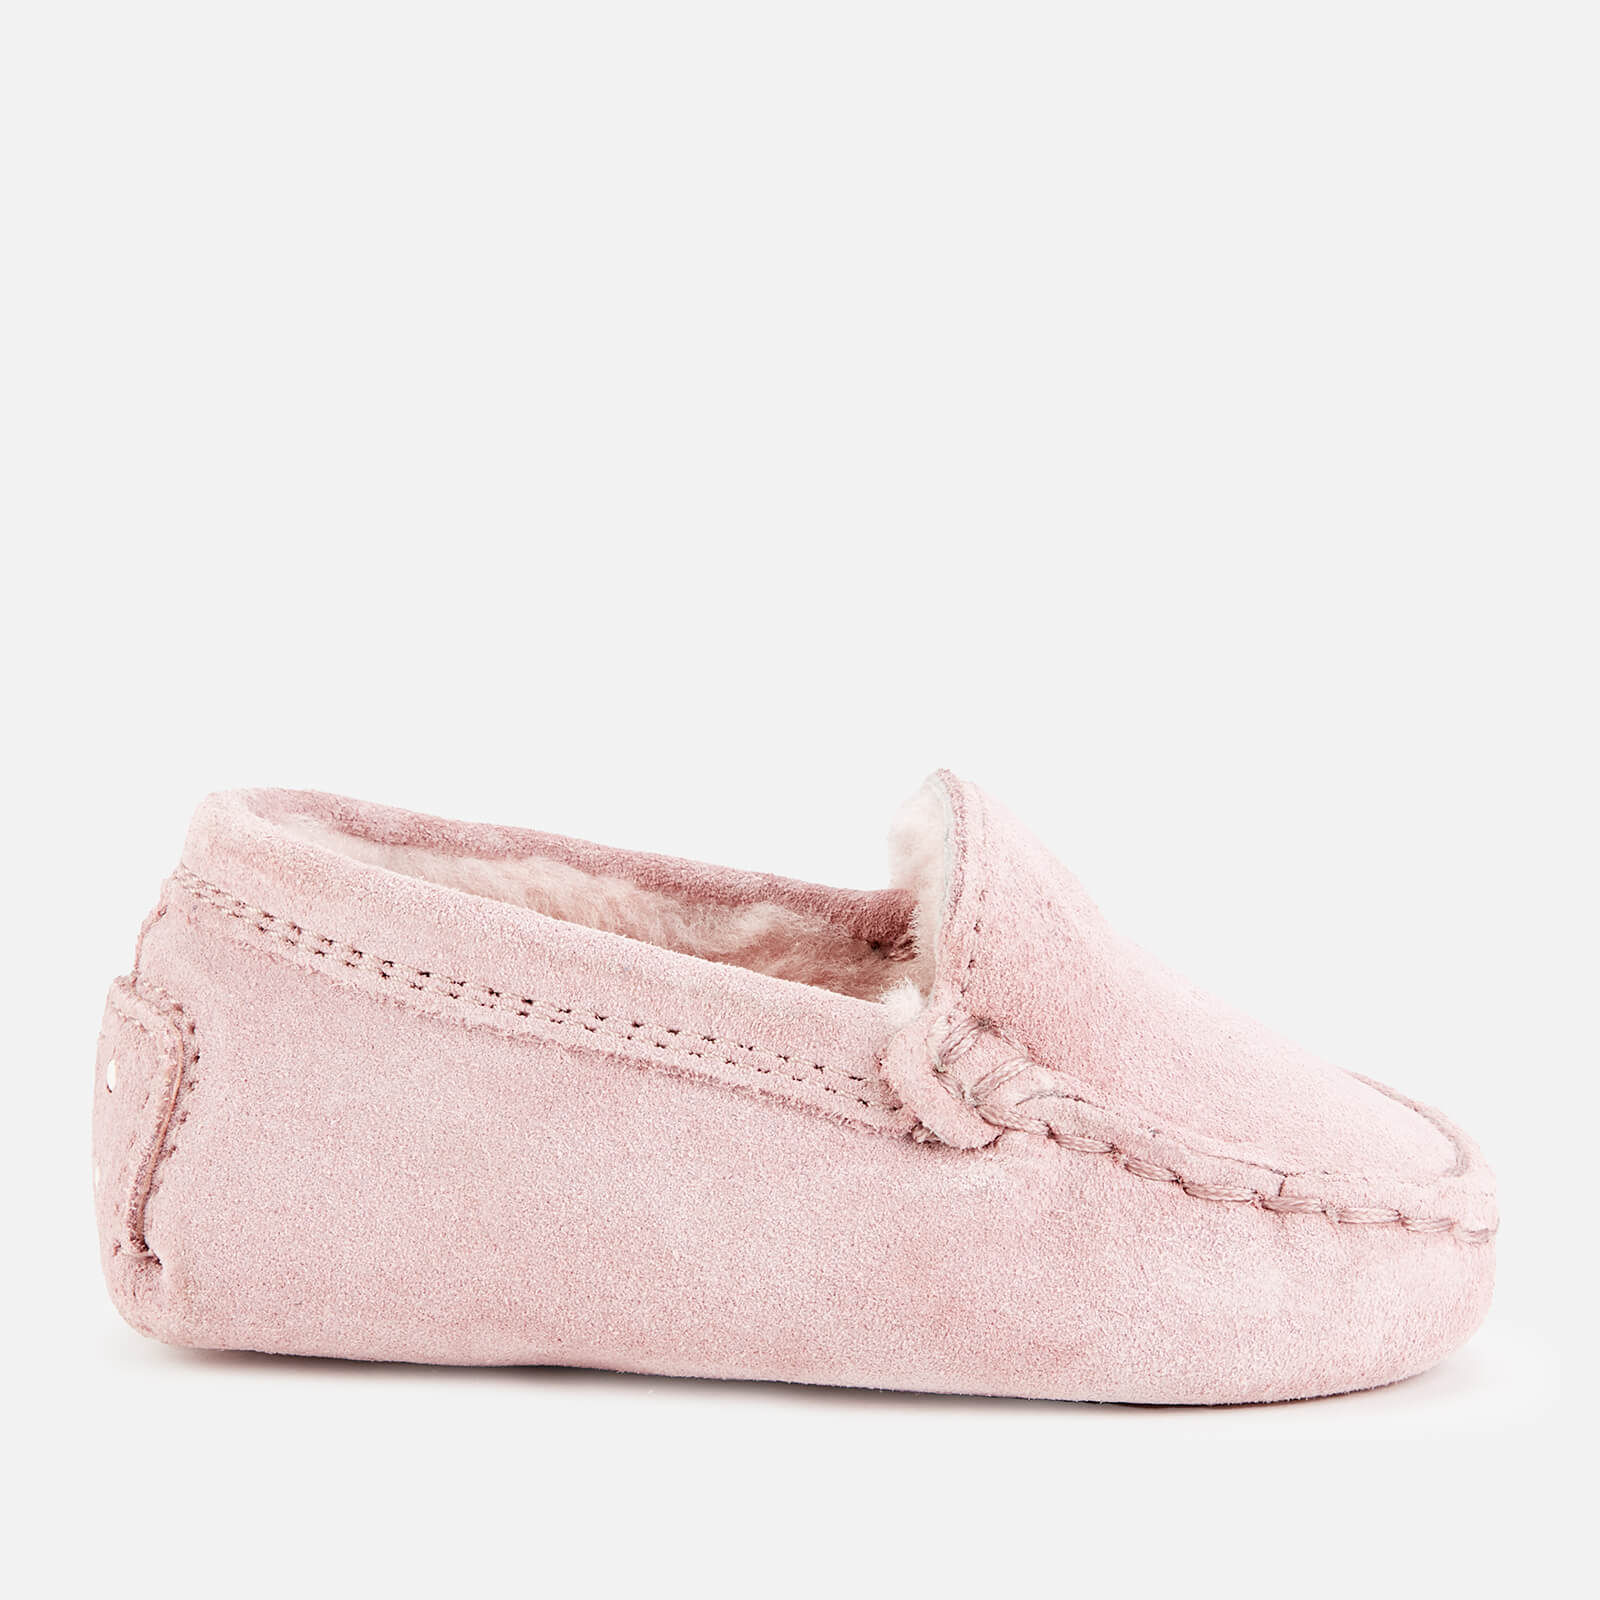 Tods Babys' Suede Moccasin Loafers - Rosa - UK 1 Baby